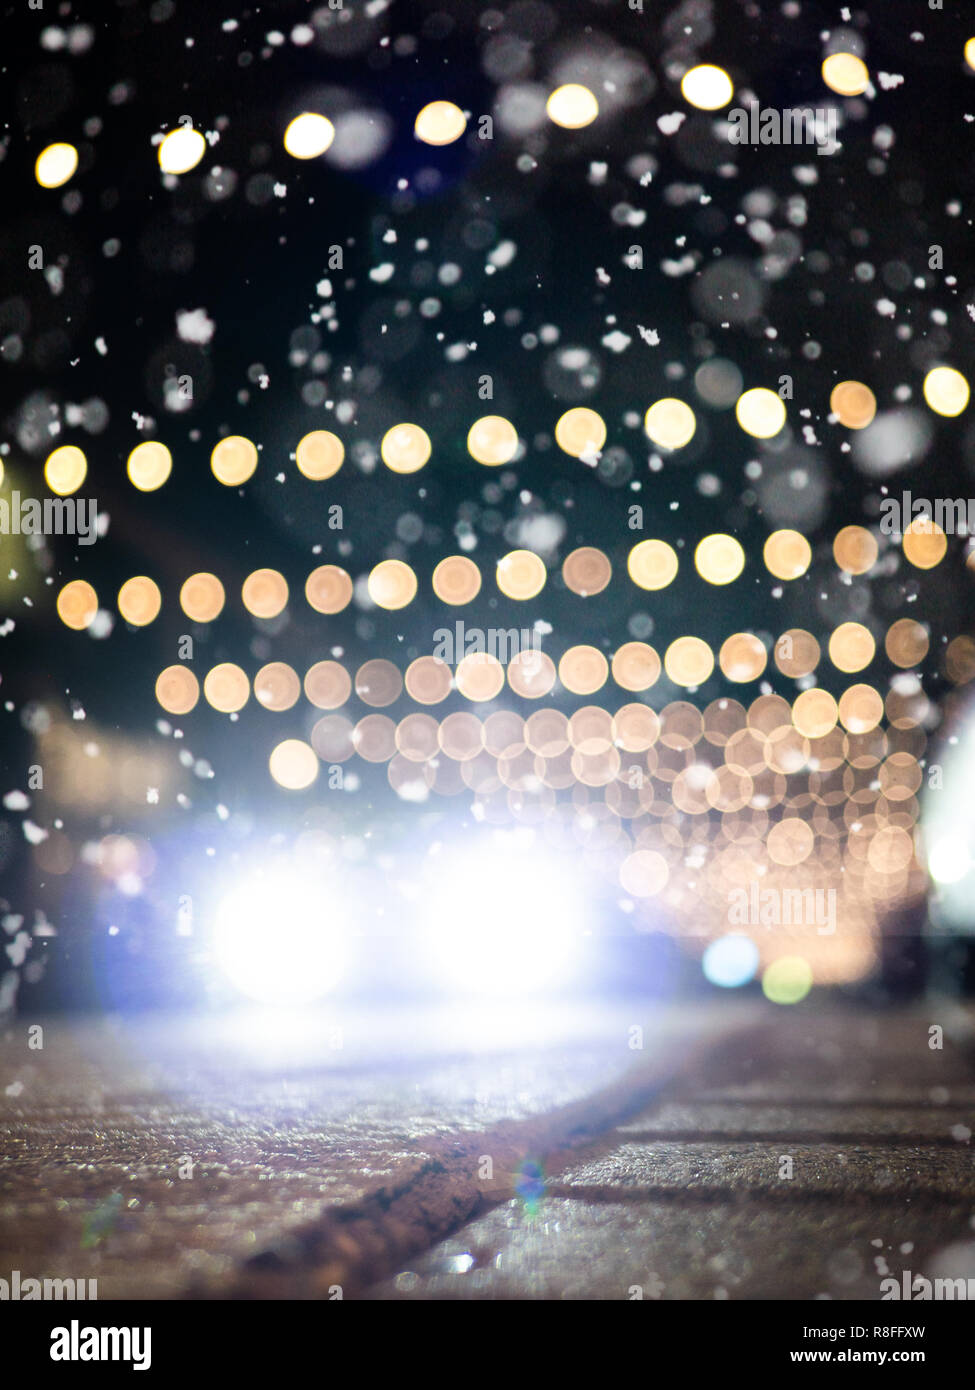 Slippery streets: Defocused car driving on snowy street with christmas decoration, snow falling Stock Photo